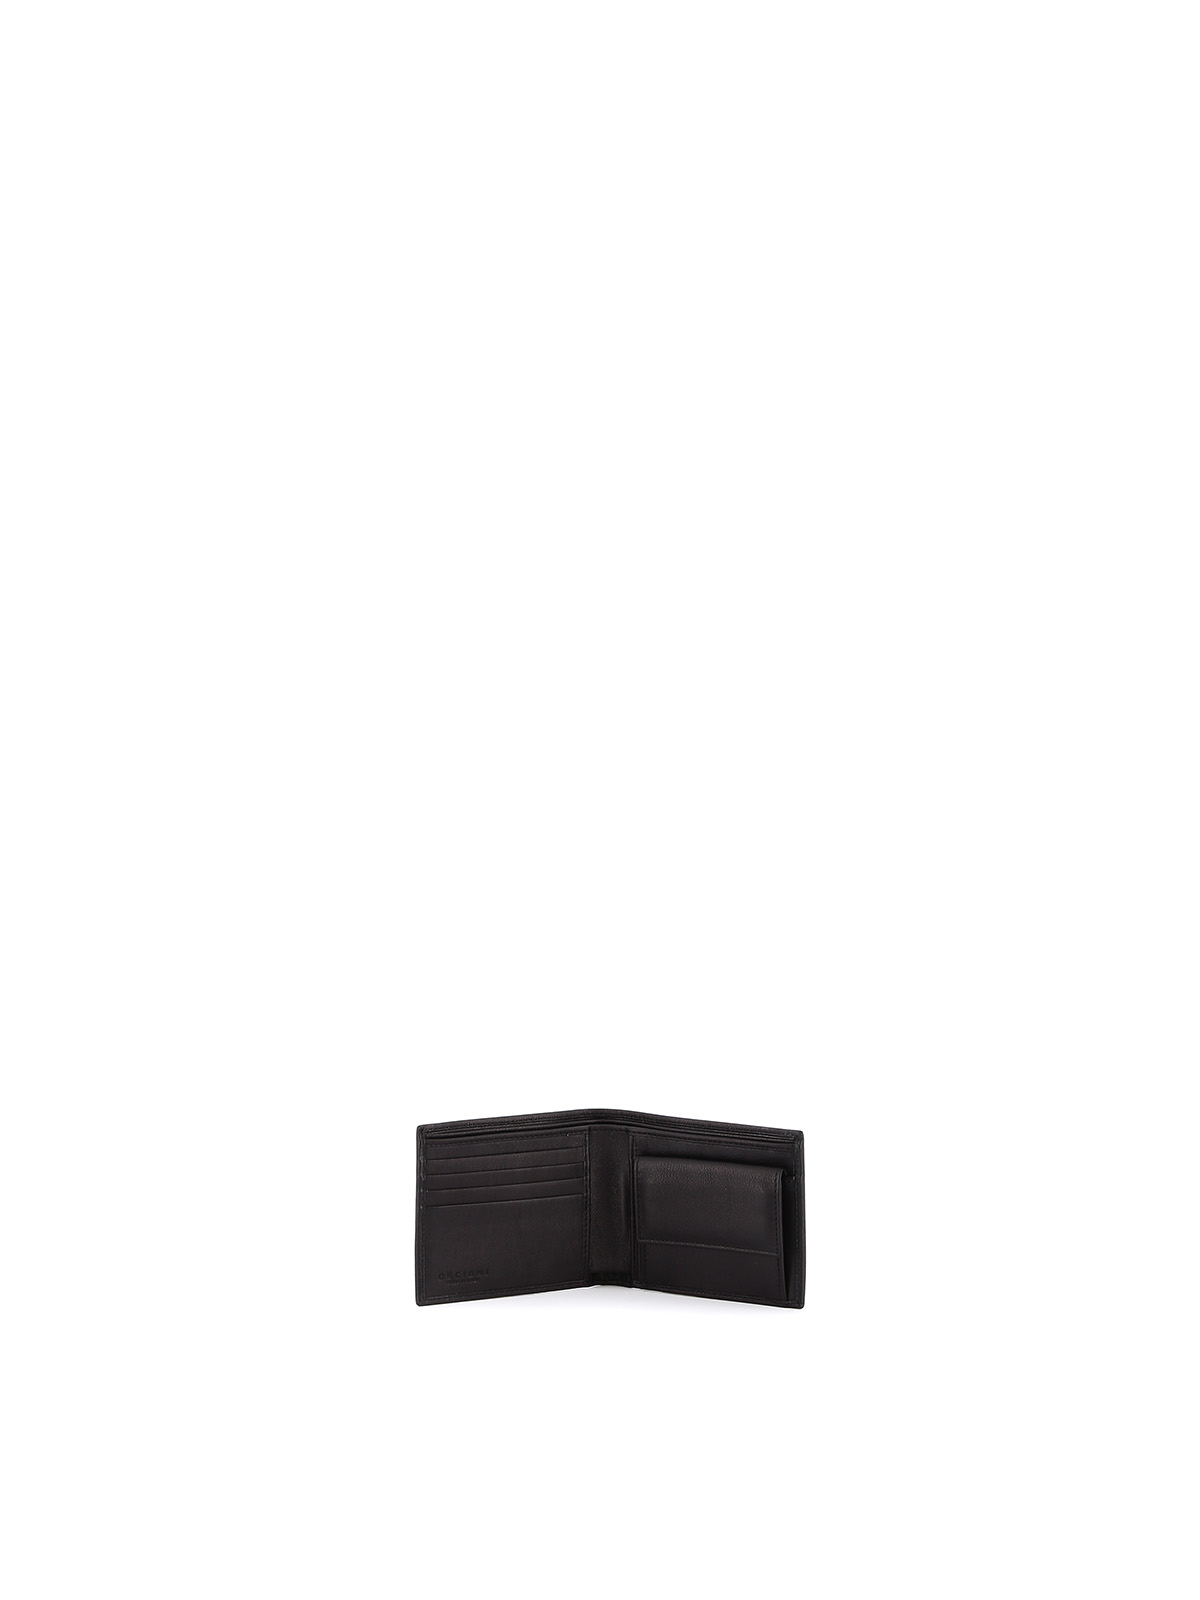 Shop Orciani Coin Pocket Leather Bifold Wallet In Black